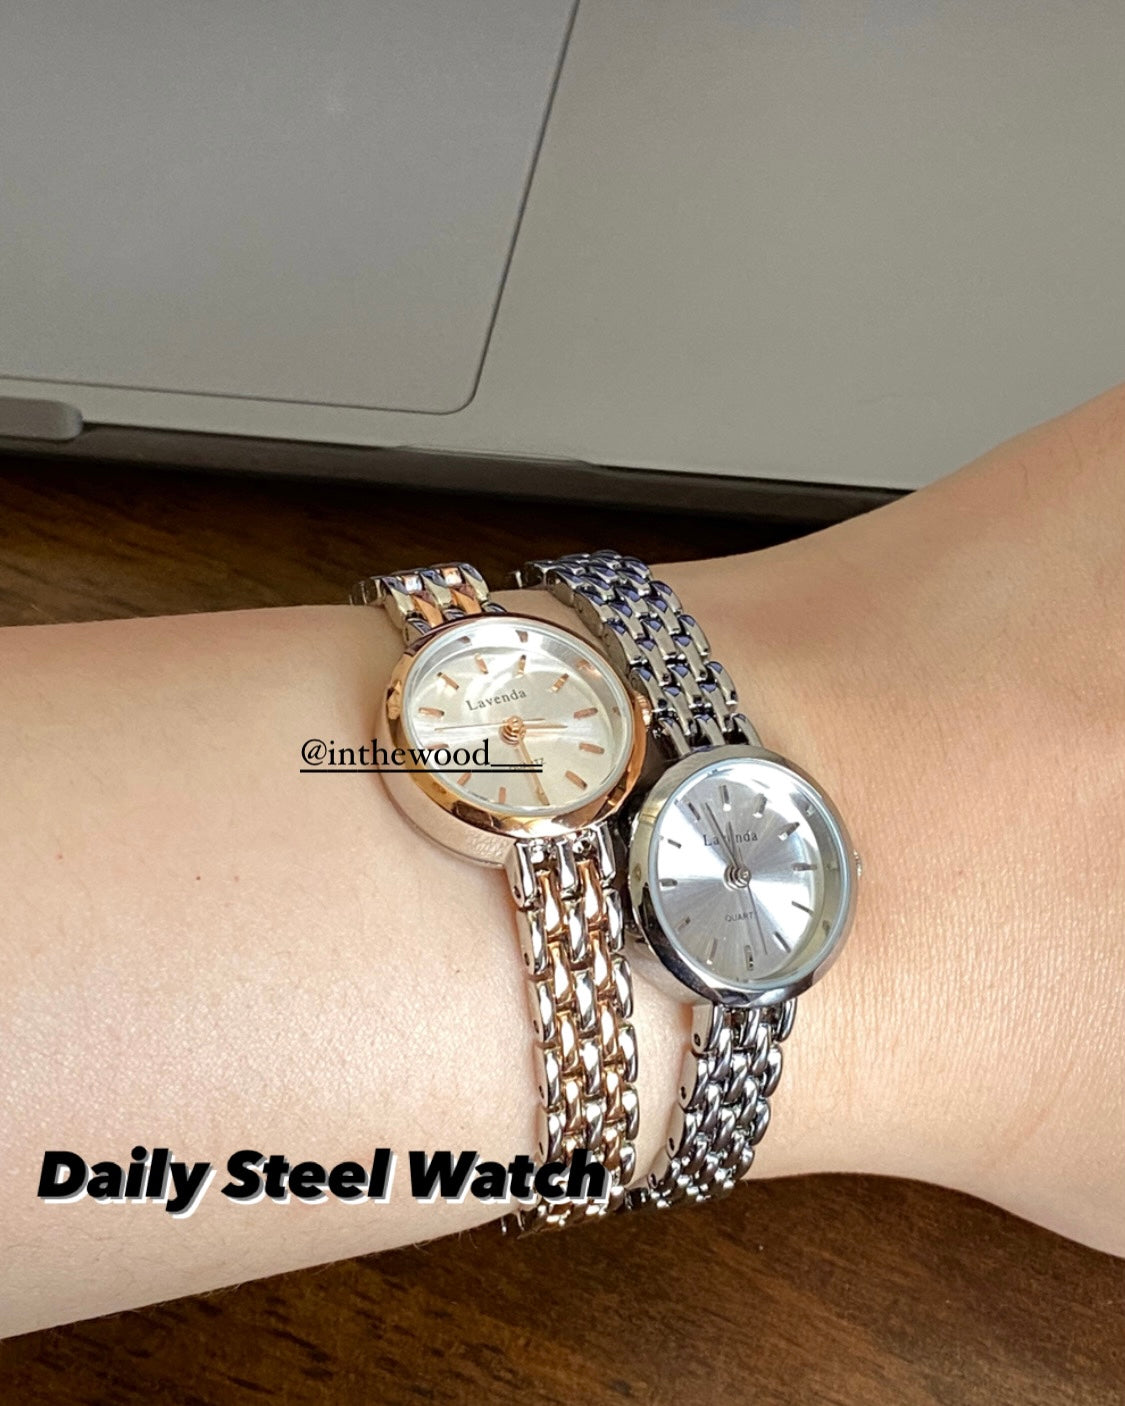 Daily Steel Watch